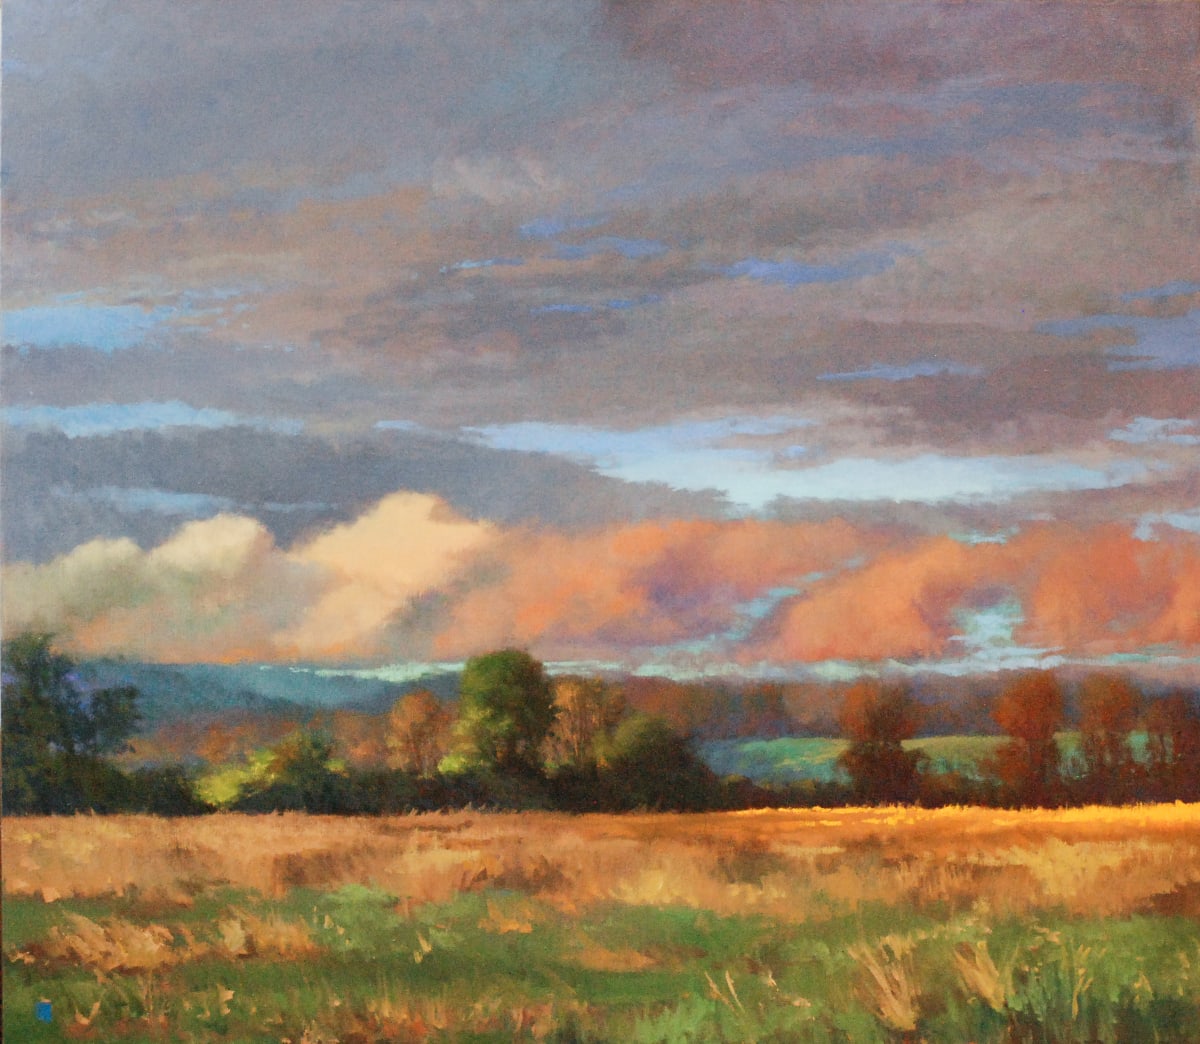 Summer Evening, Front by Gregory Blue  Image: 16"H X 18.4"W Giclee on German Etching Paper \ Edition of 100 \ 1 Remarque